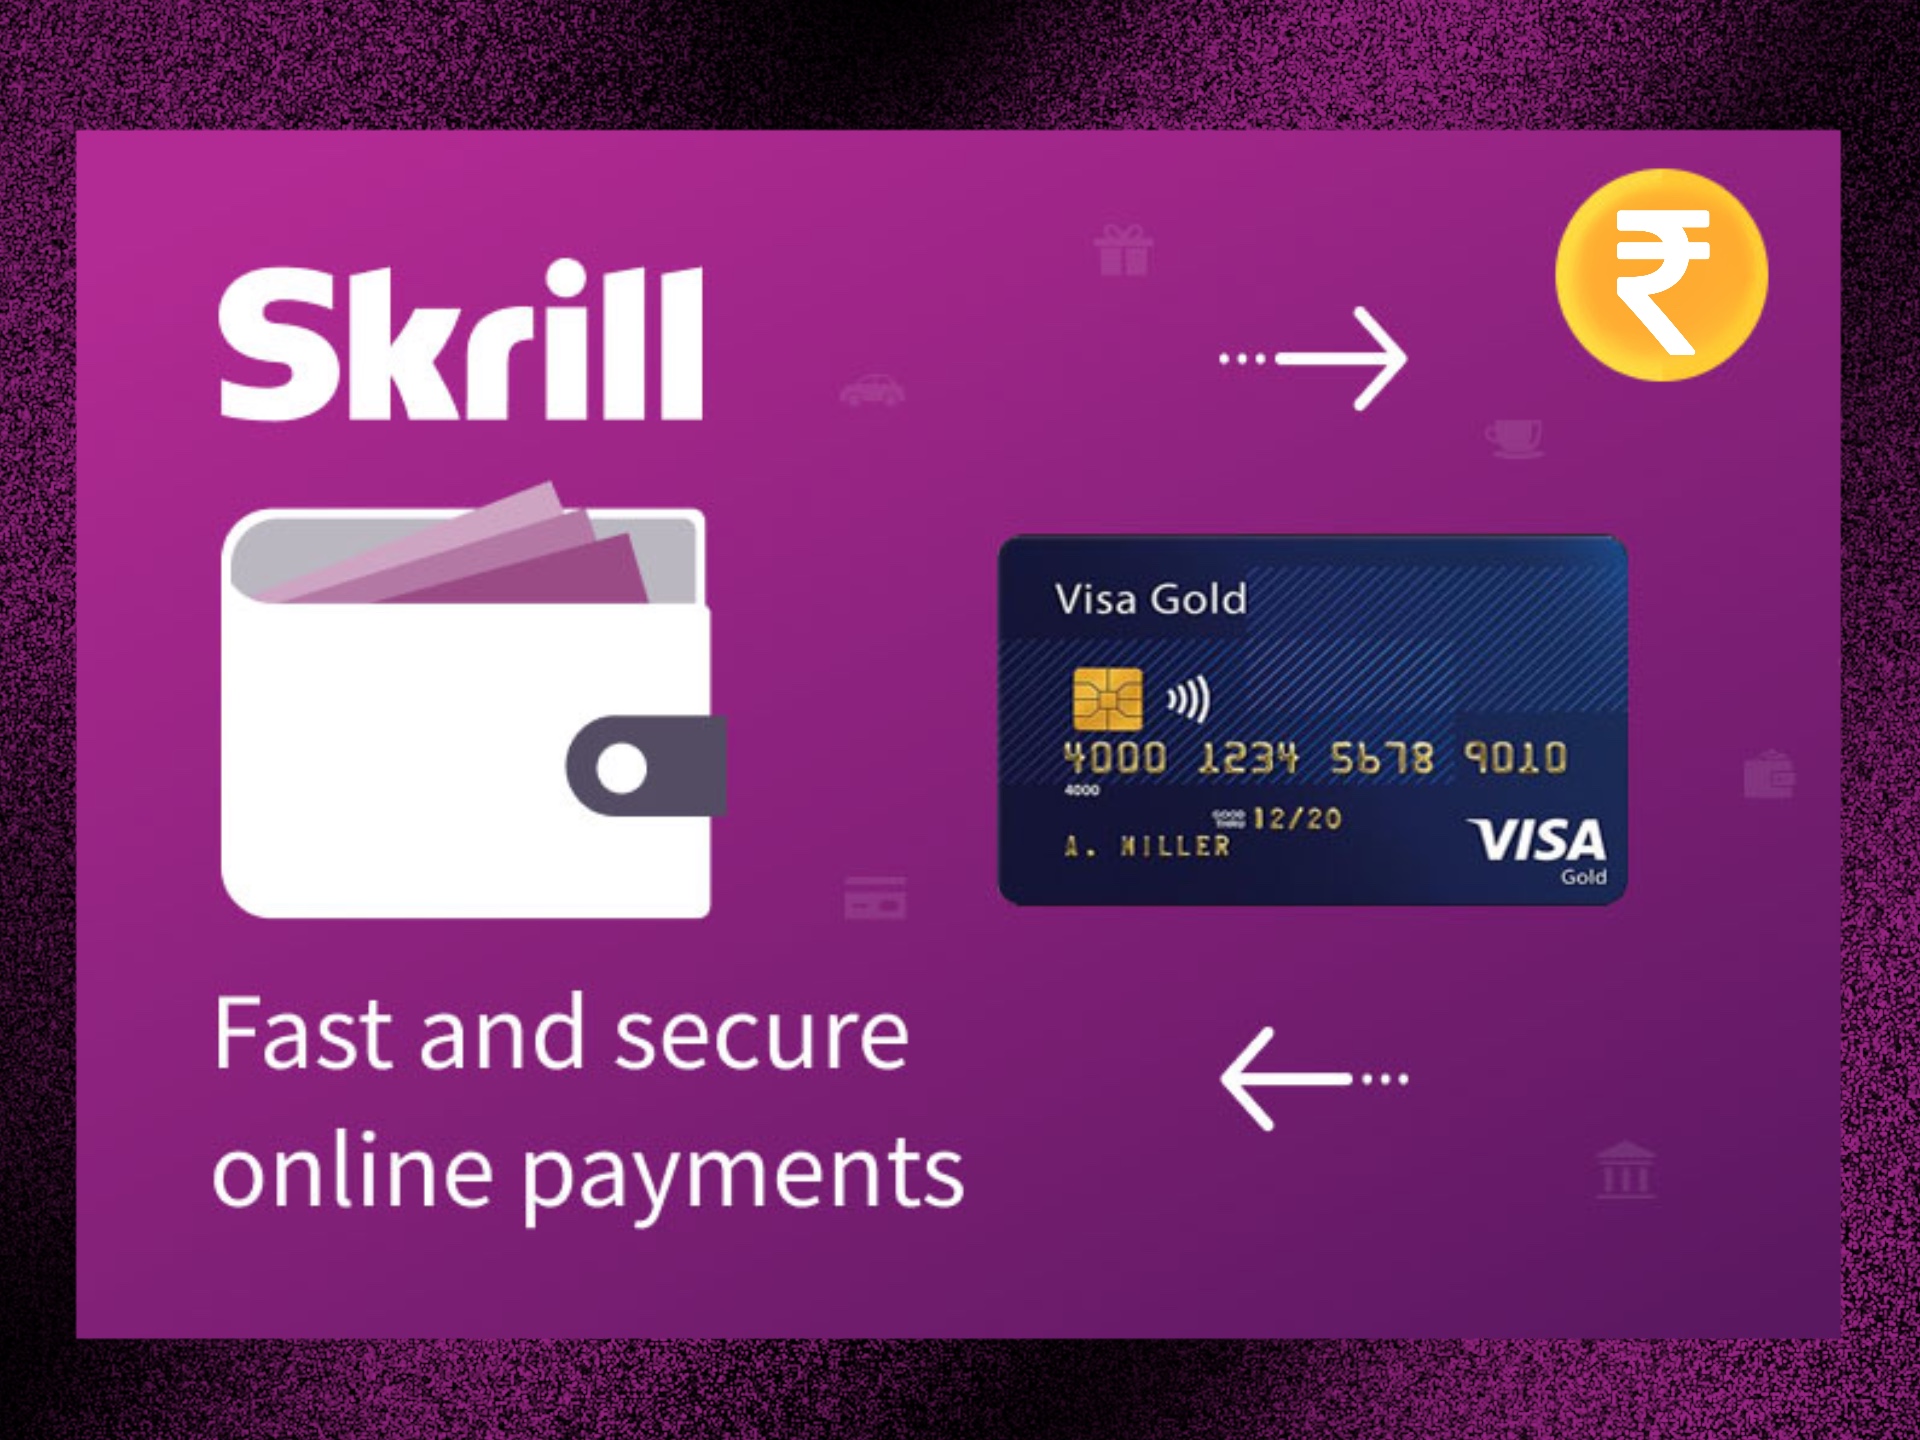 Use you usual payment card to top up your Skrill account.